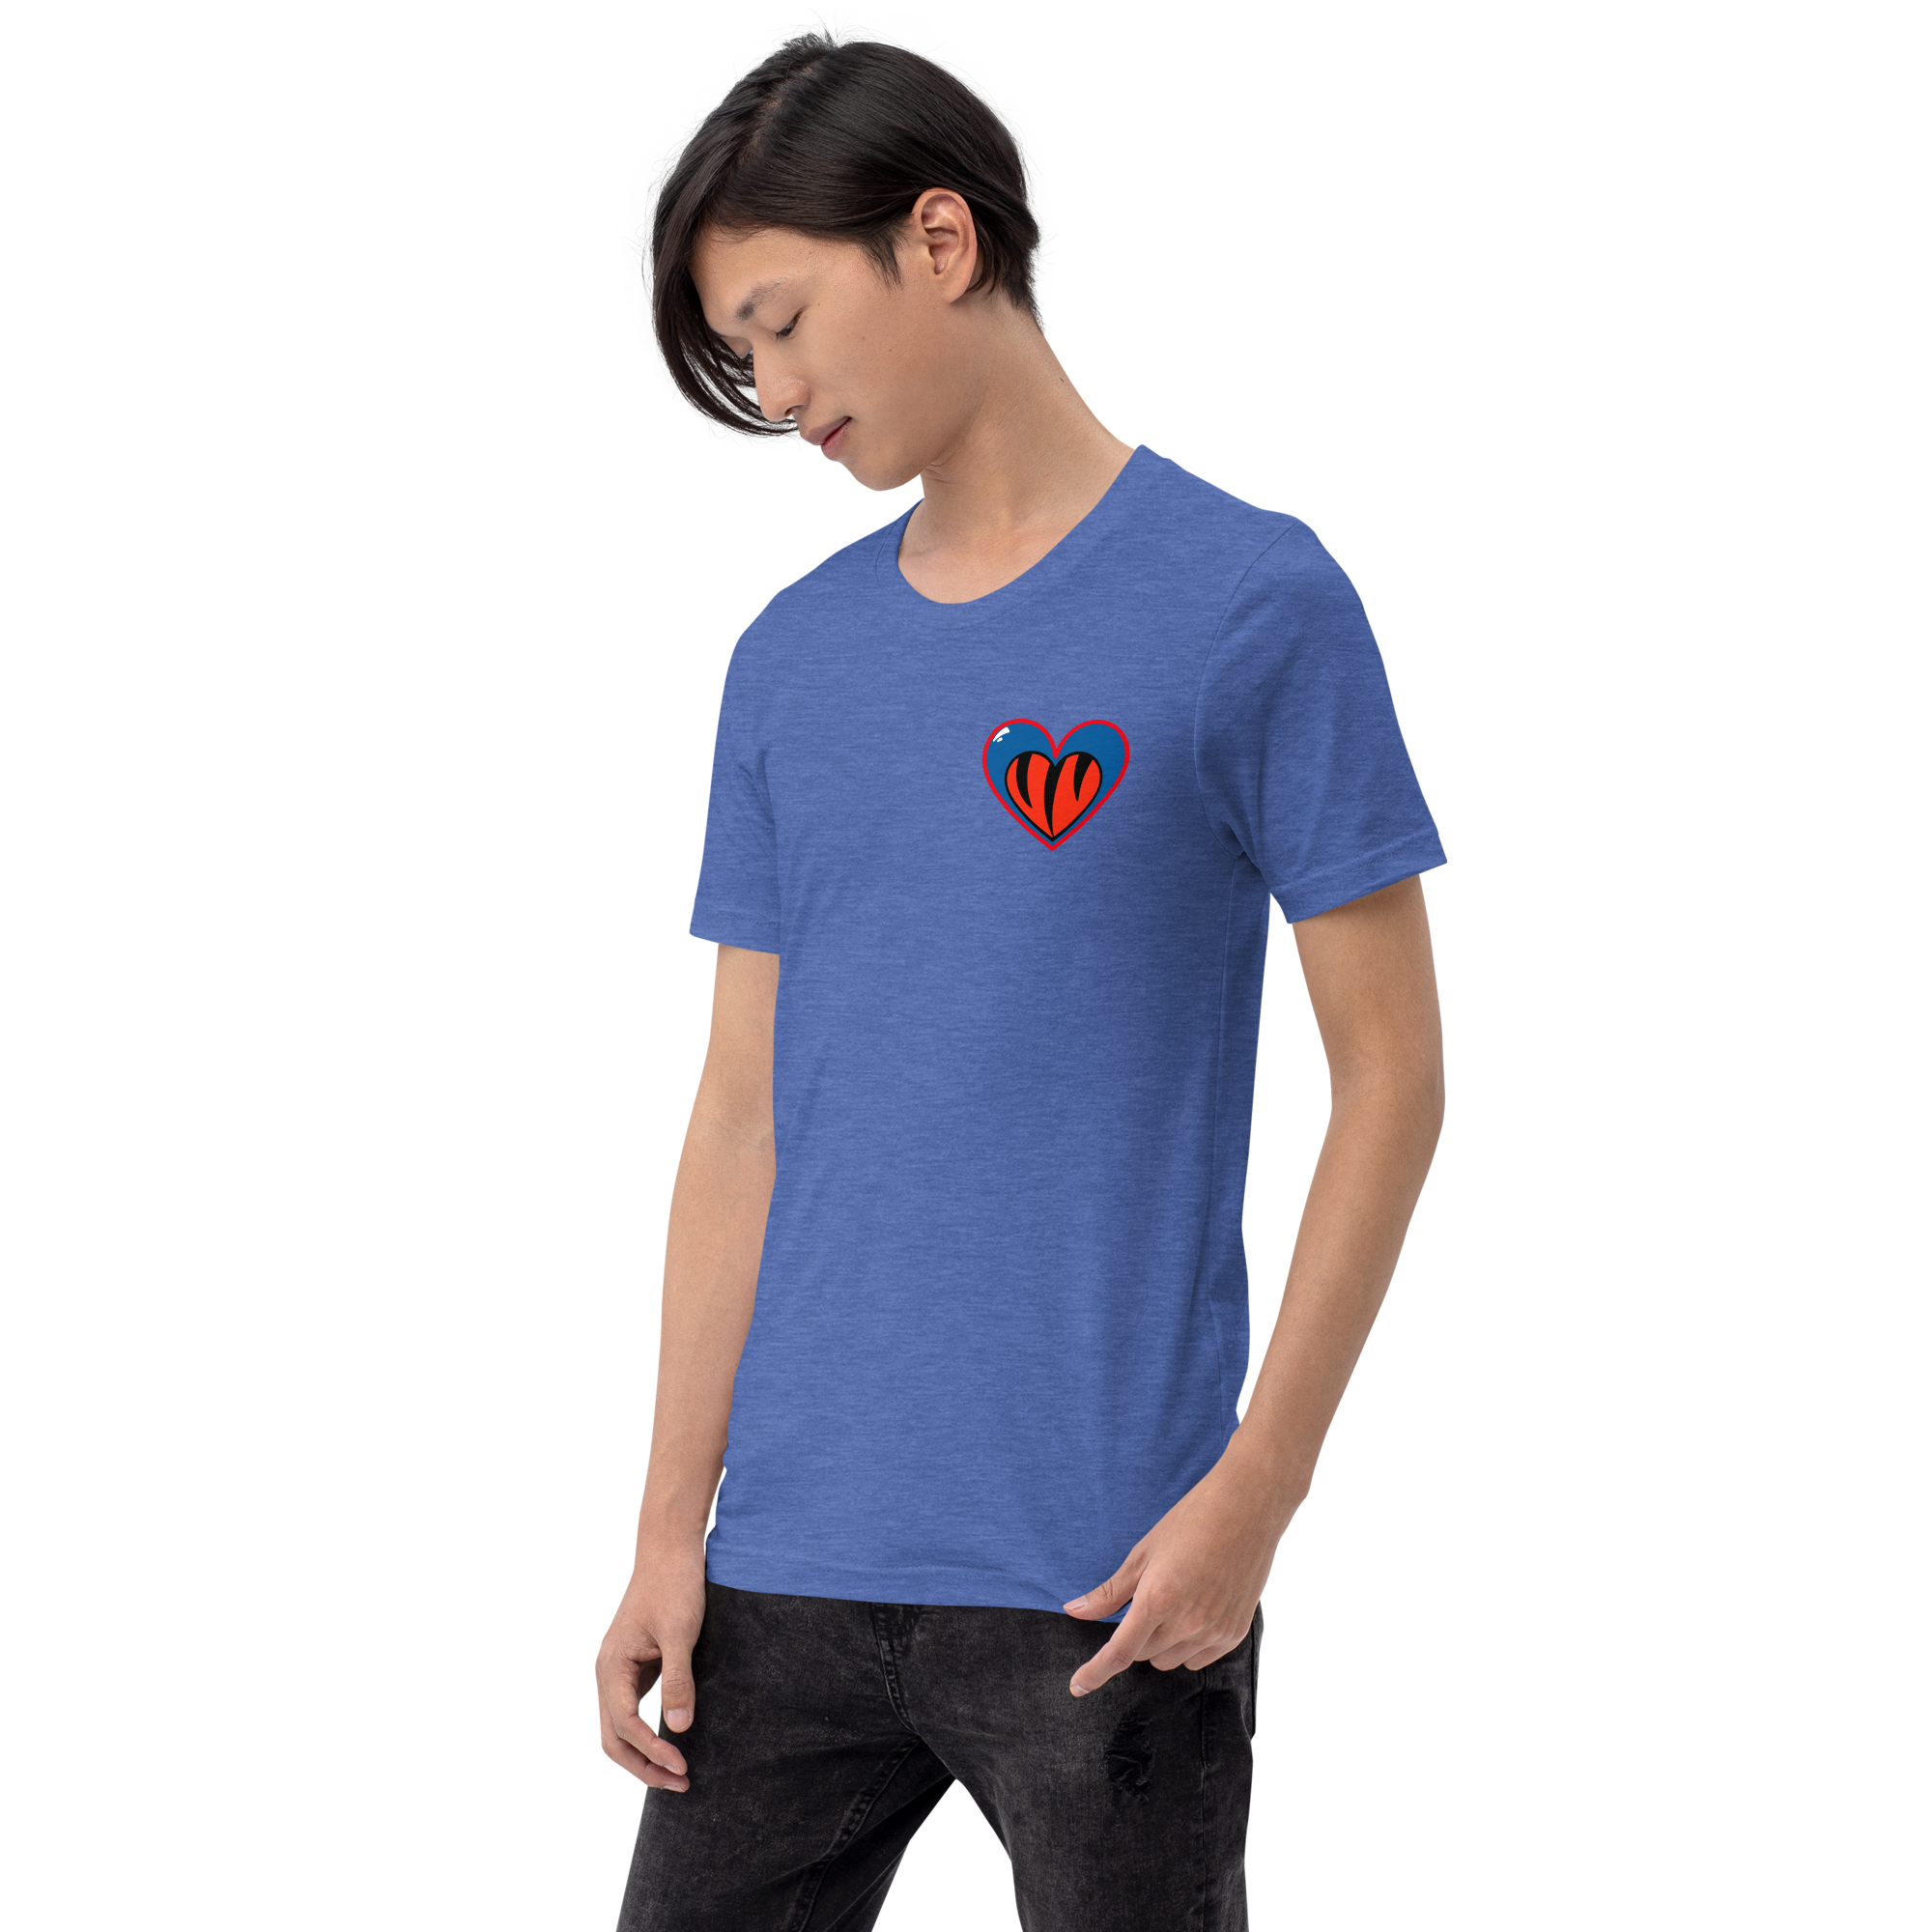 Two Teams One Heart Pray For Damar Shirt (100% Proceeds Donated)